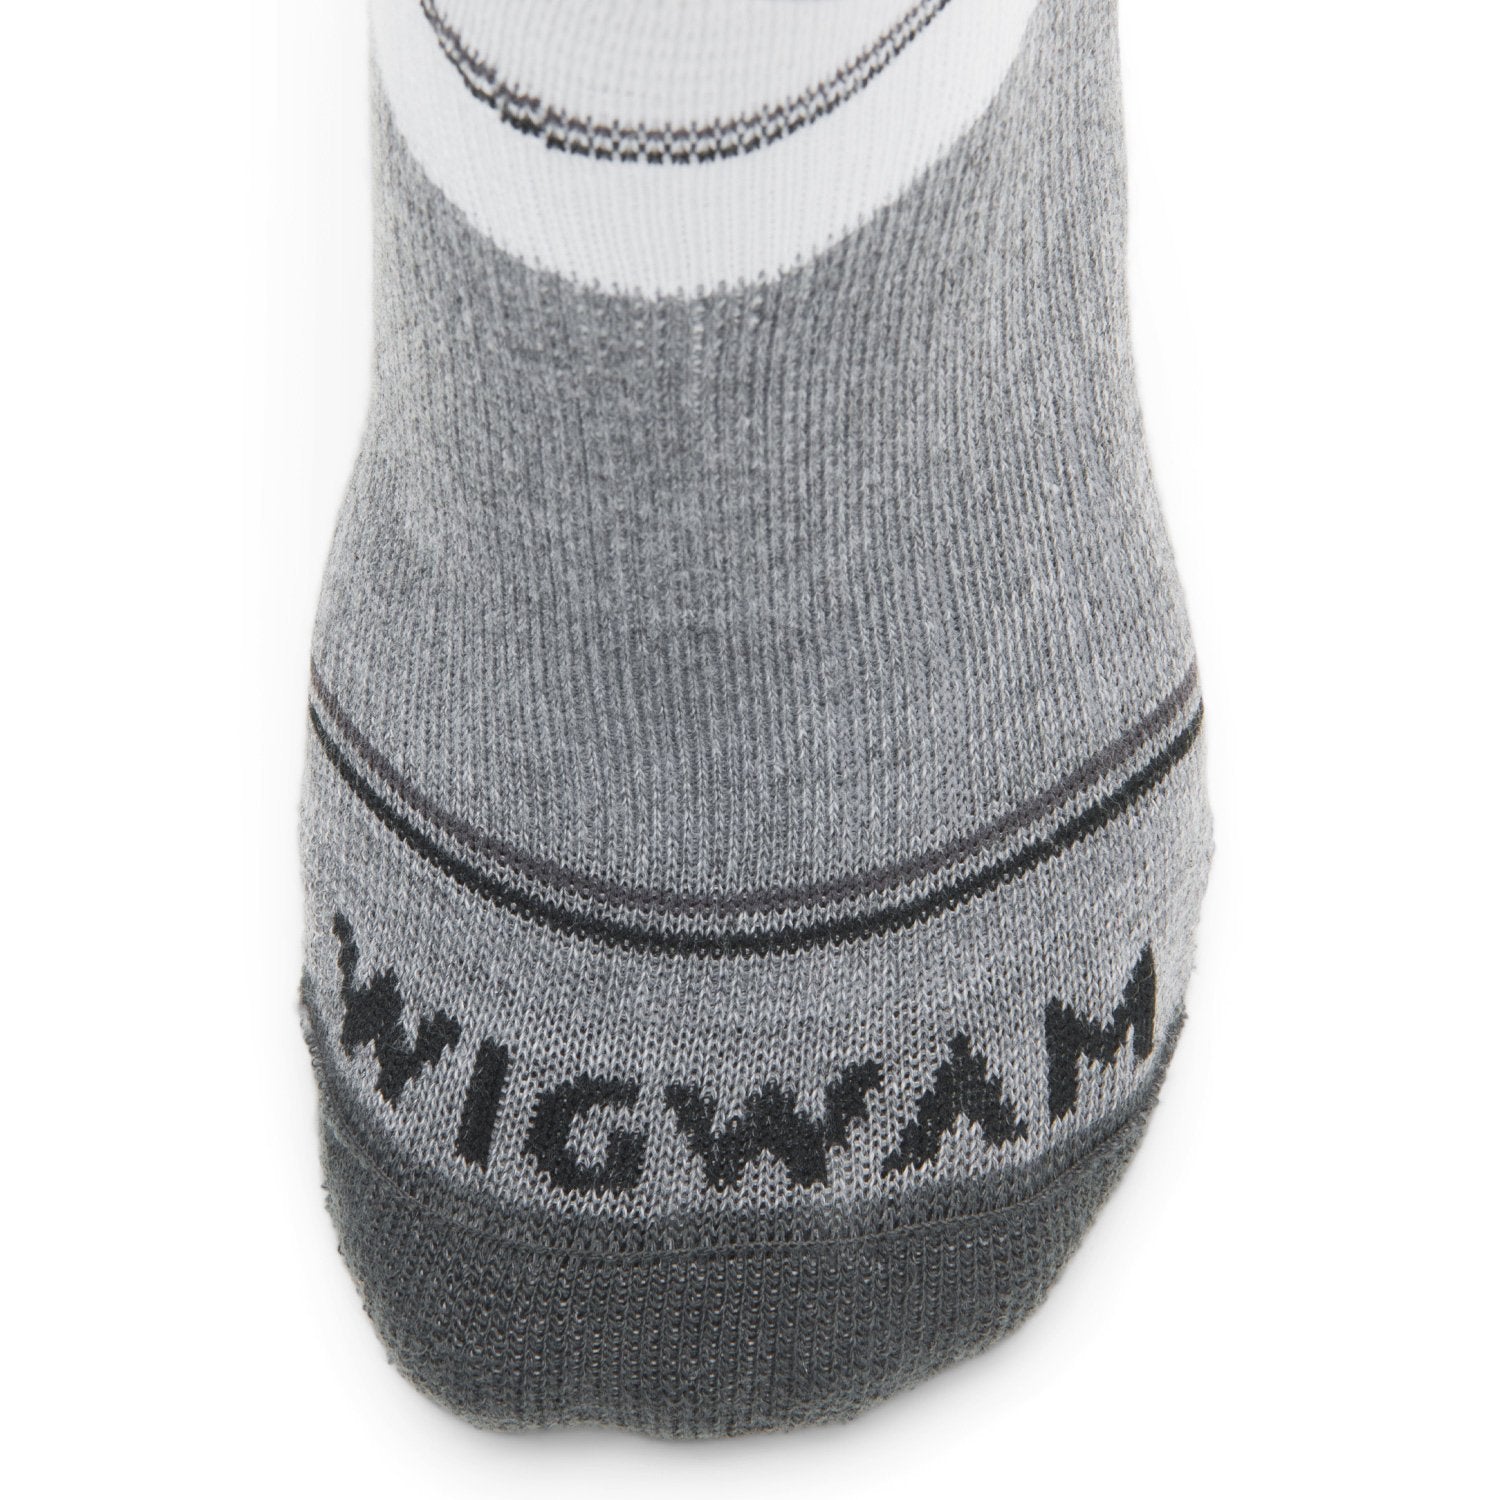 Surpass Lightweight Low Sock - White/Grey toe perspective - made in The USA Wigwam Socks